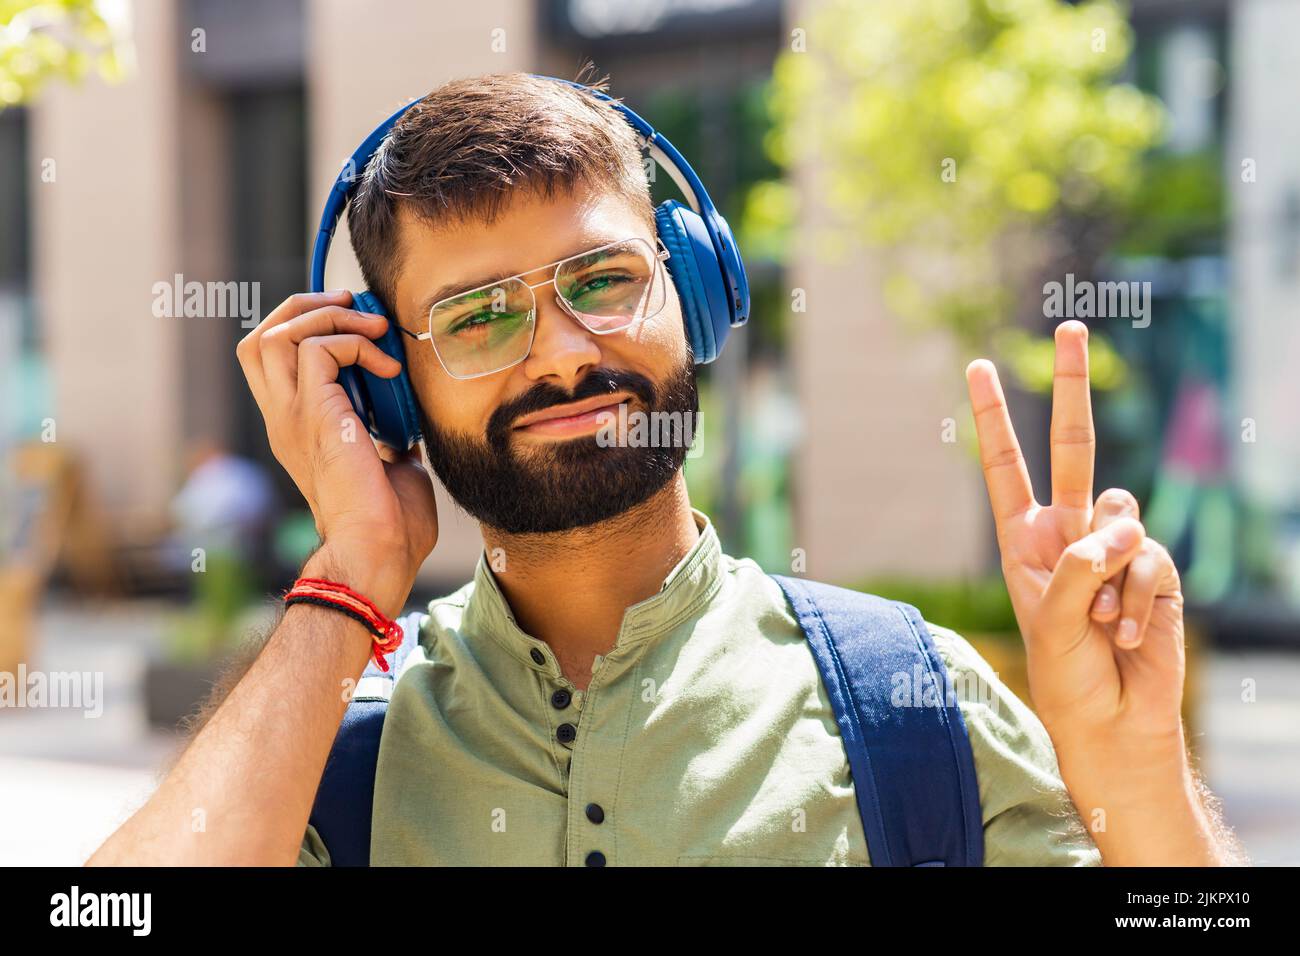 indian student with blue headset and backpack well looking at sunny day Stock Photo